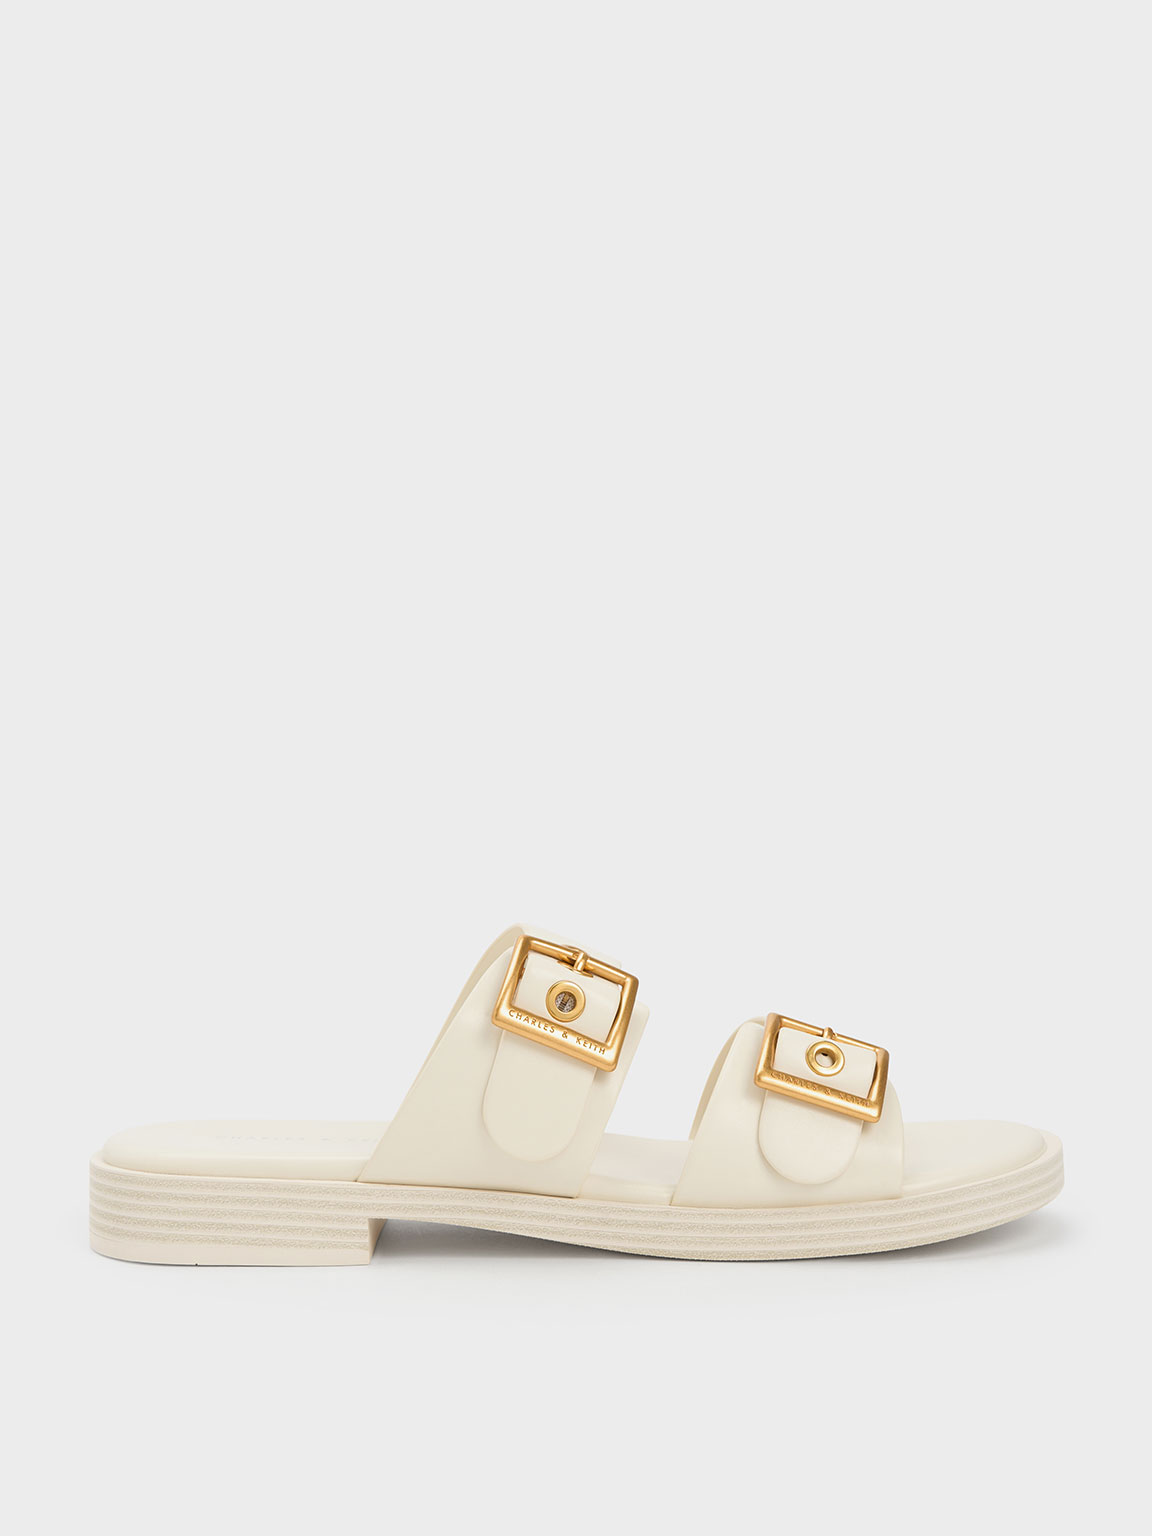 White Buckled Double Strap Slide Sandals - CHARLES & KEITH SG